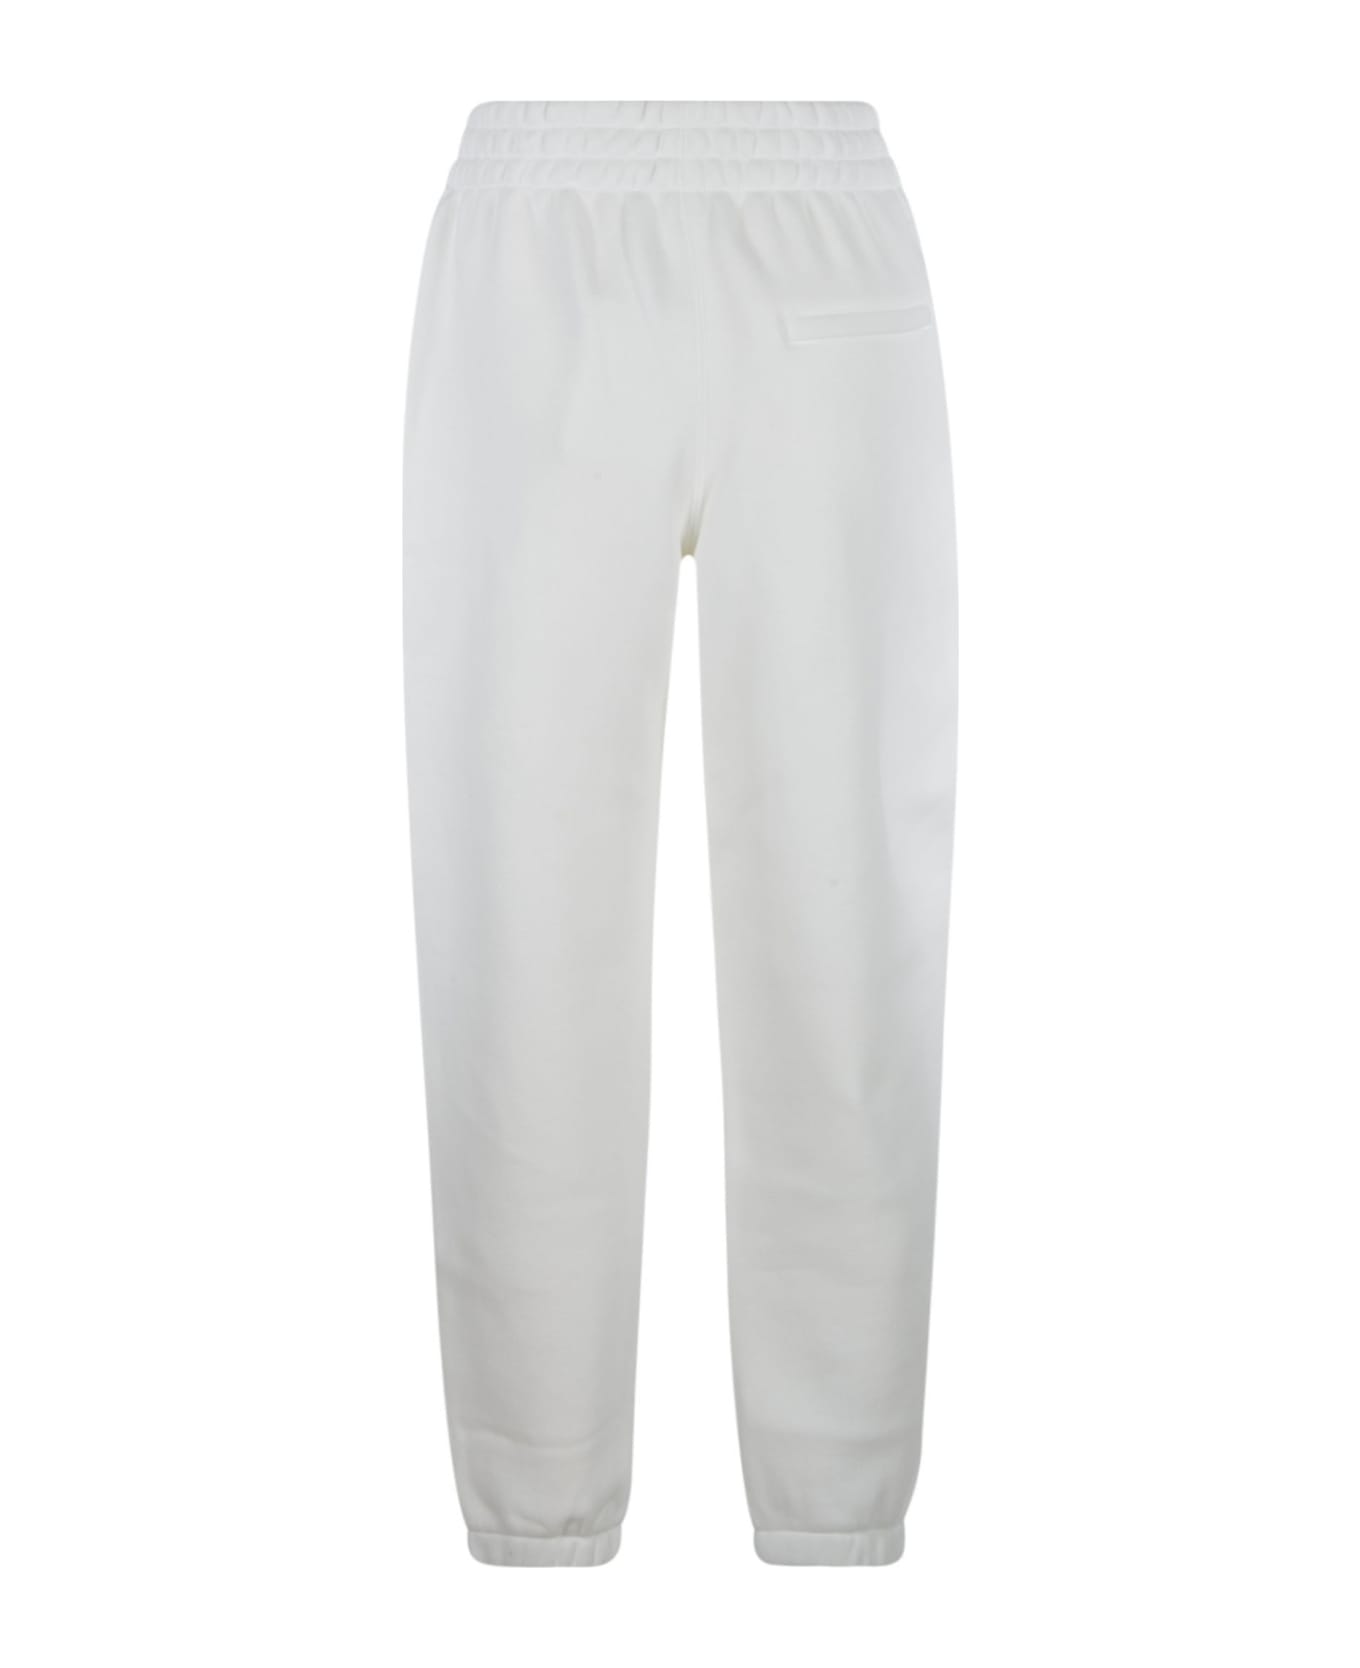 Alexander Wang Essential Terry Classic Track Pants - White